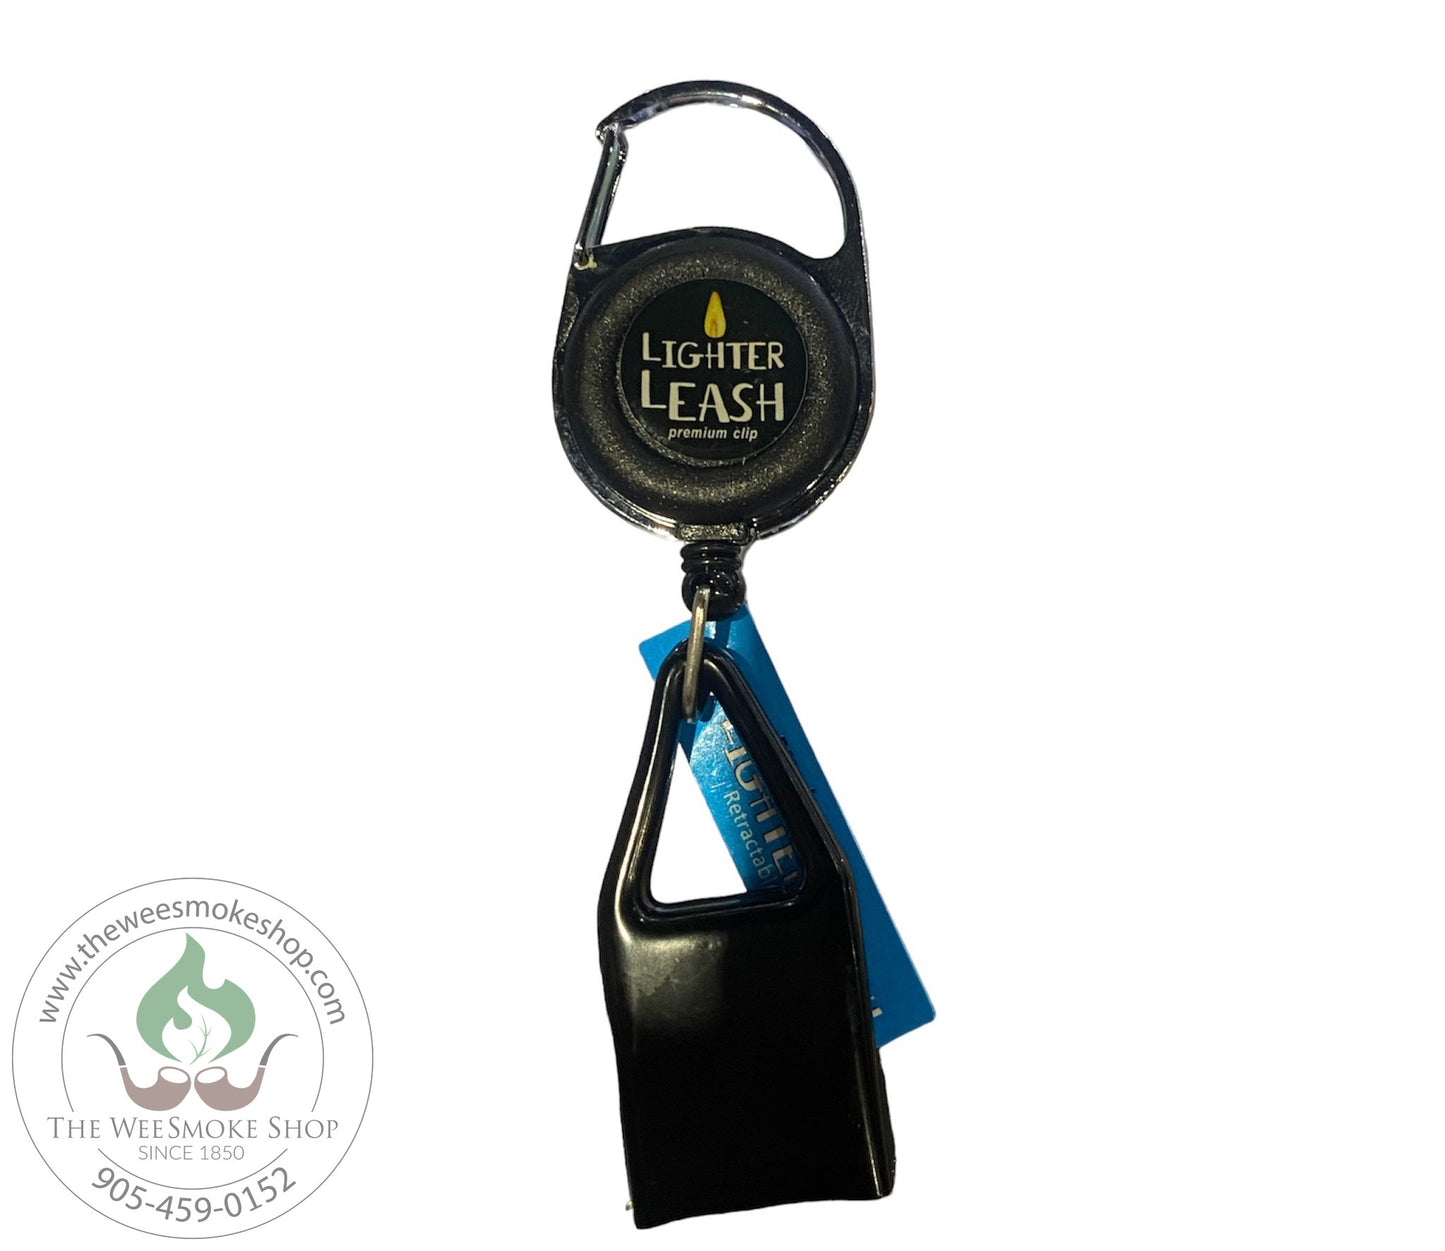 Black-Lighter Leash-Lighter Accessories-The Wee Smoke Shop